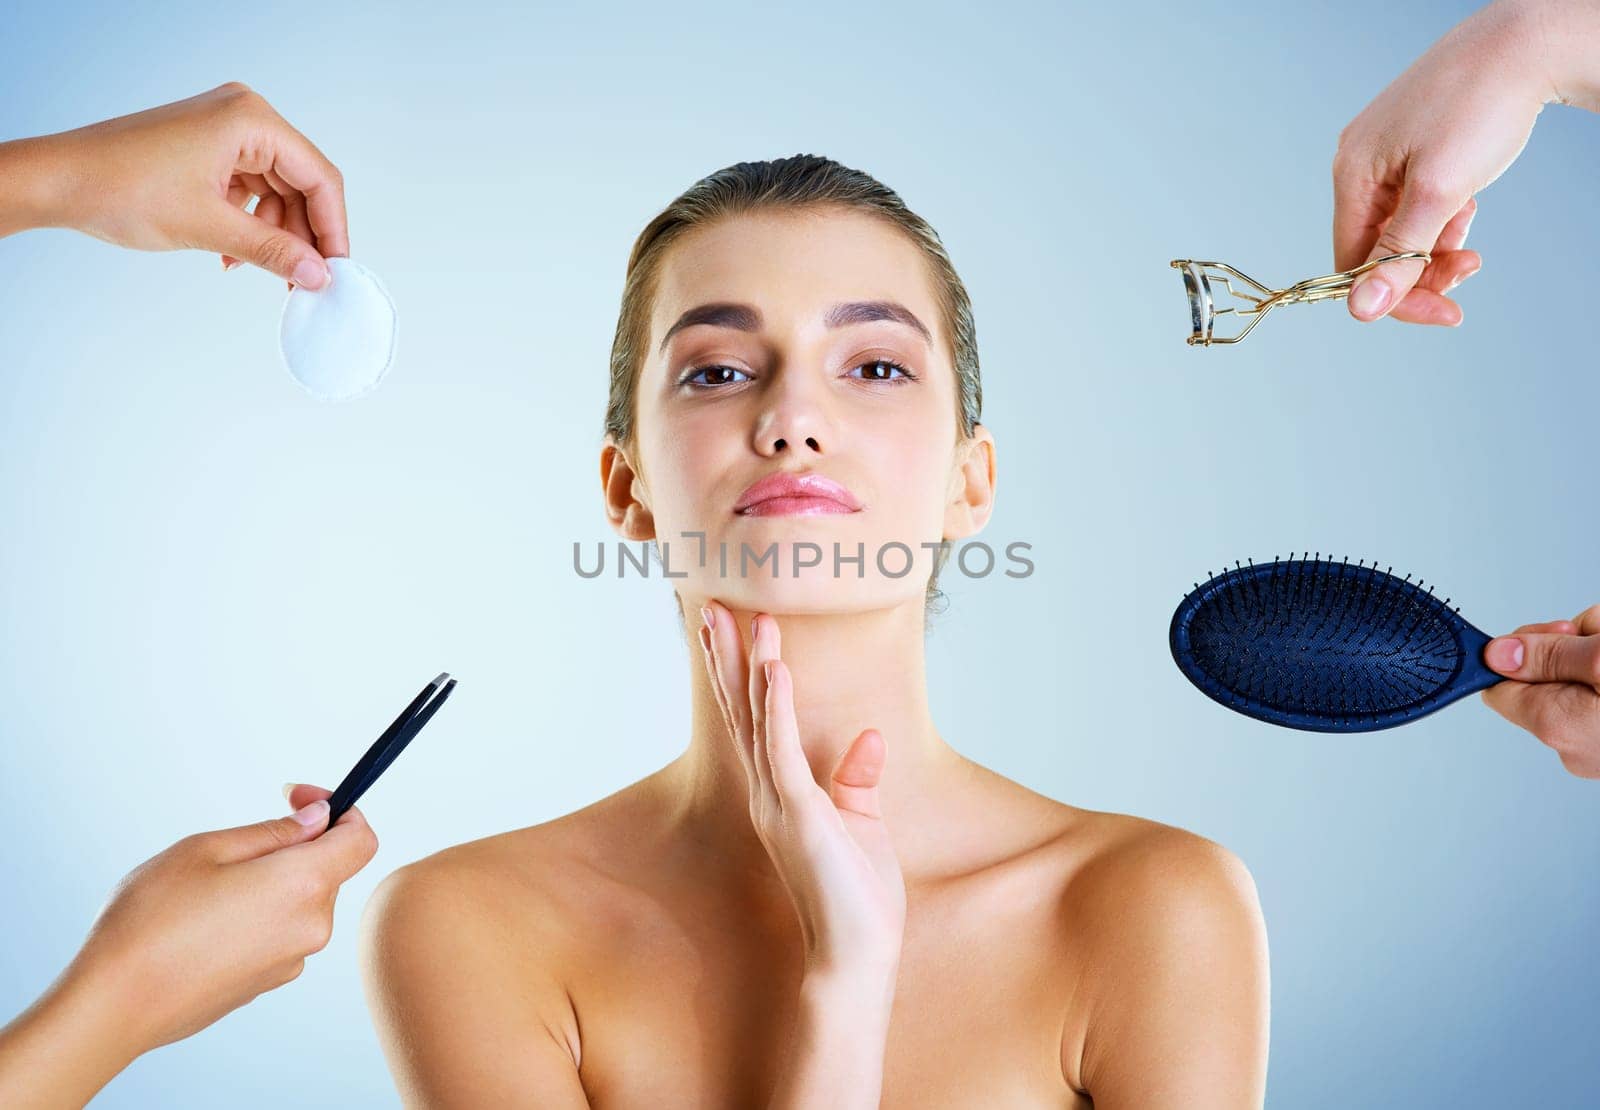 Basic tools for beauty. Studio portrait of a beautiful young woman with an assortment of beauty tools around her against a blue background